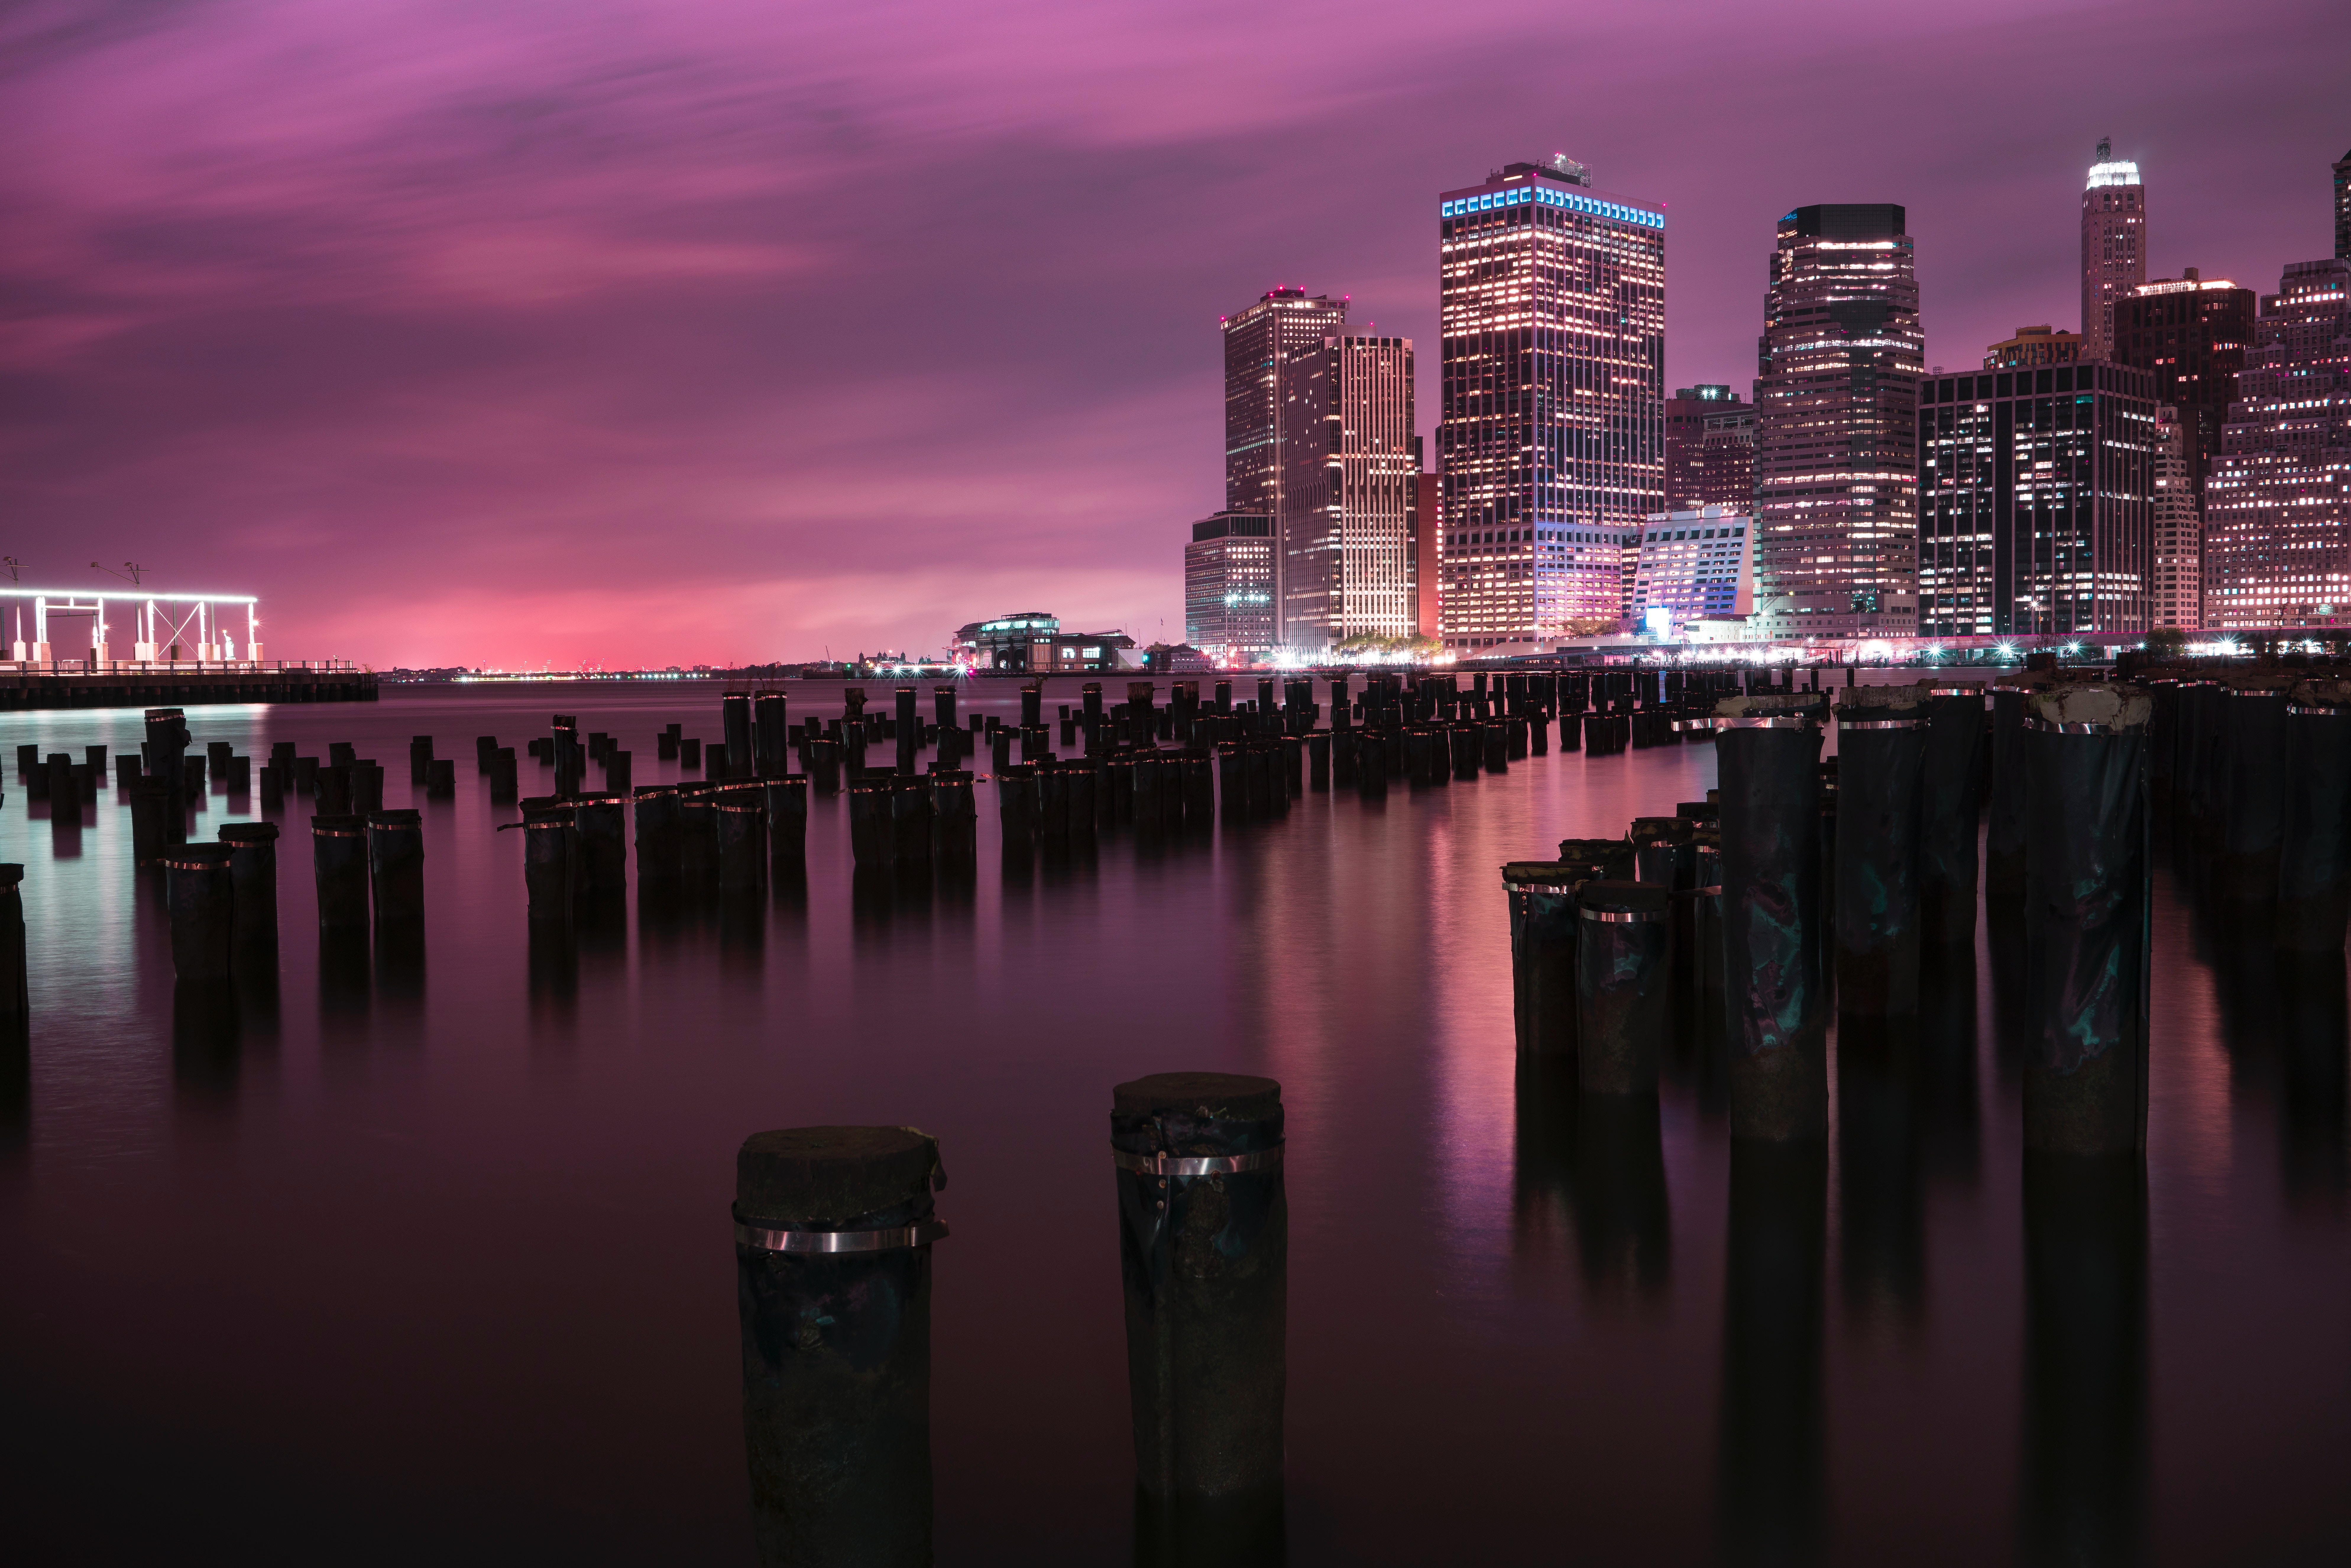 usa, night city, cities, building, shore, bank, city lights, united states